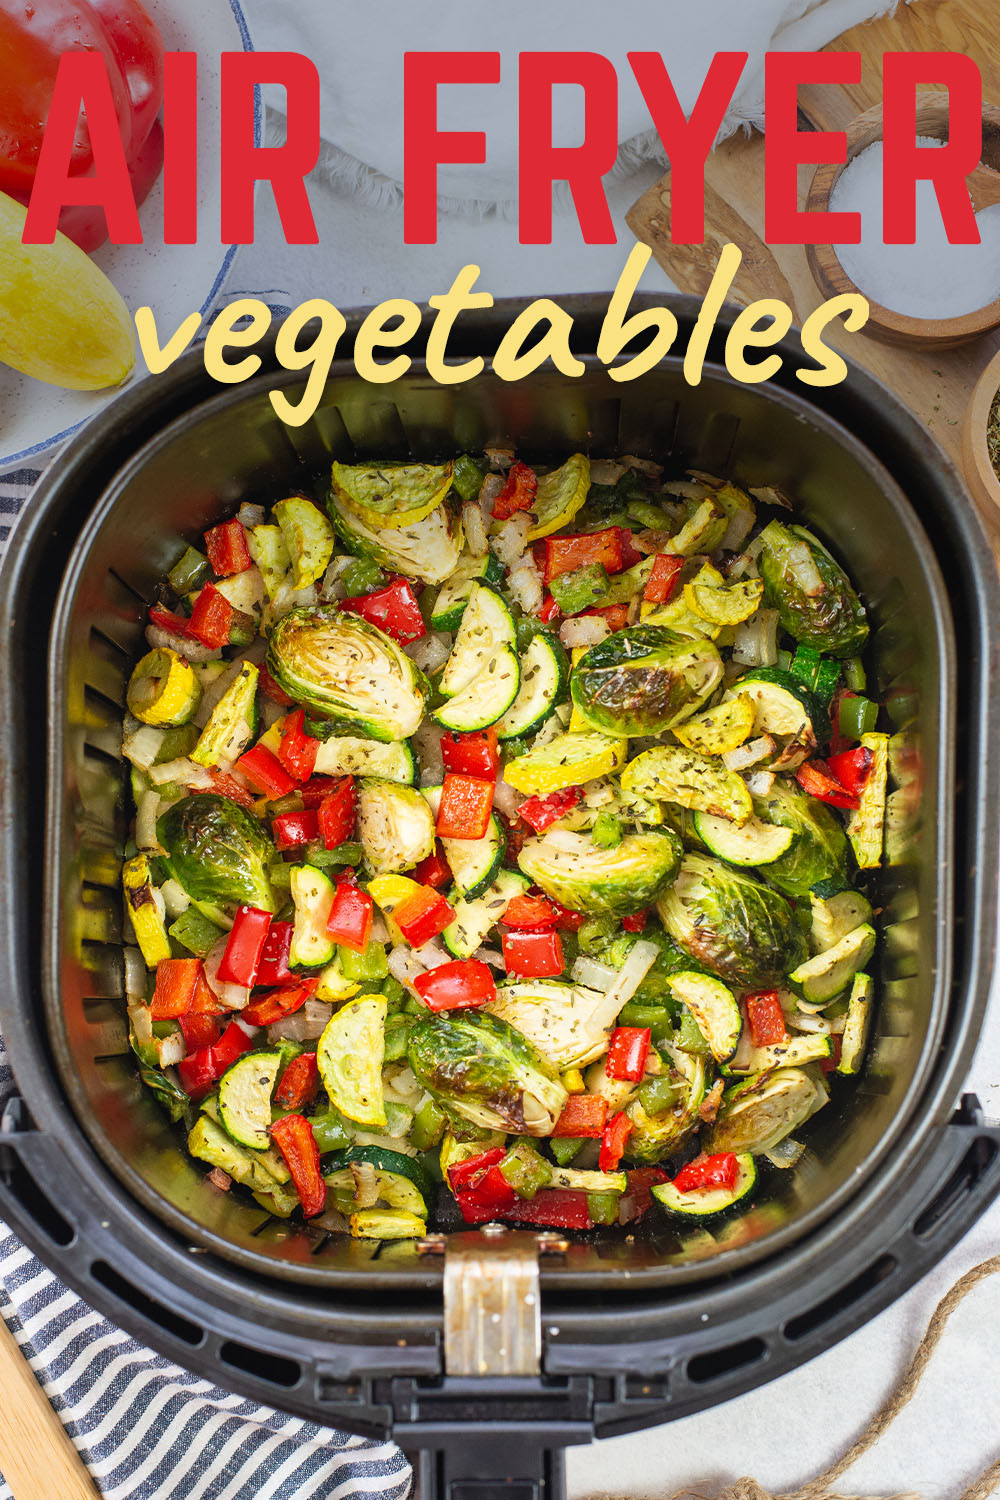 The colorful, lightly seasoned, vegetables cook great in the air fryer!  Try serving them as a side dish with your next meal!